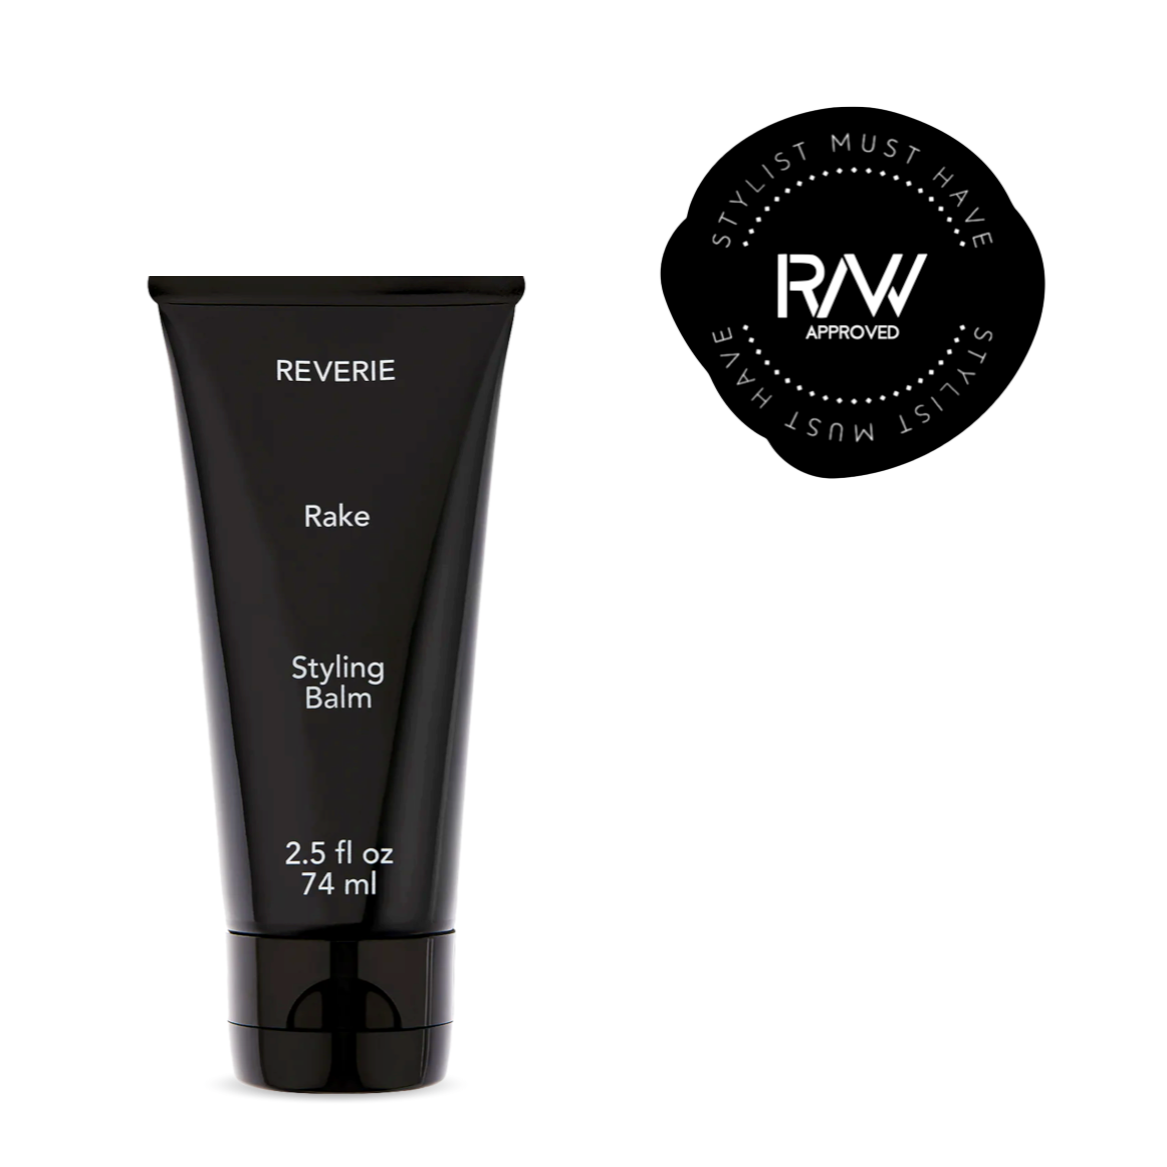 Reverie Rake Styling Balm in a sleek black tube with minimalist design, size 2.5 fl oz / 74 ml, labeled as a stylist must-have for hair care.